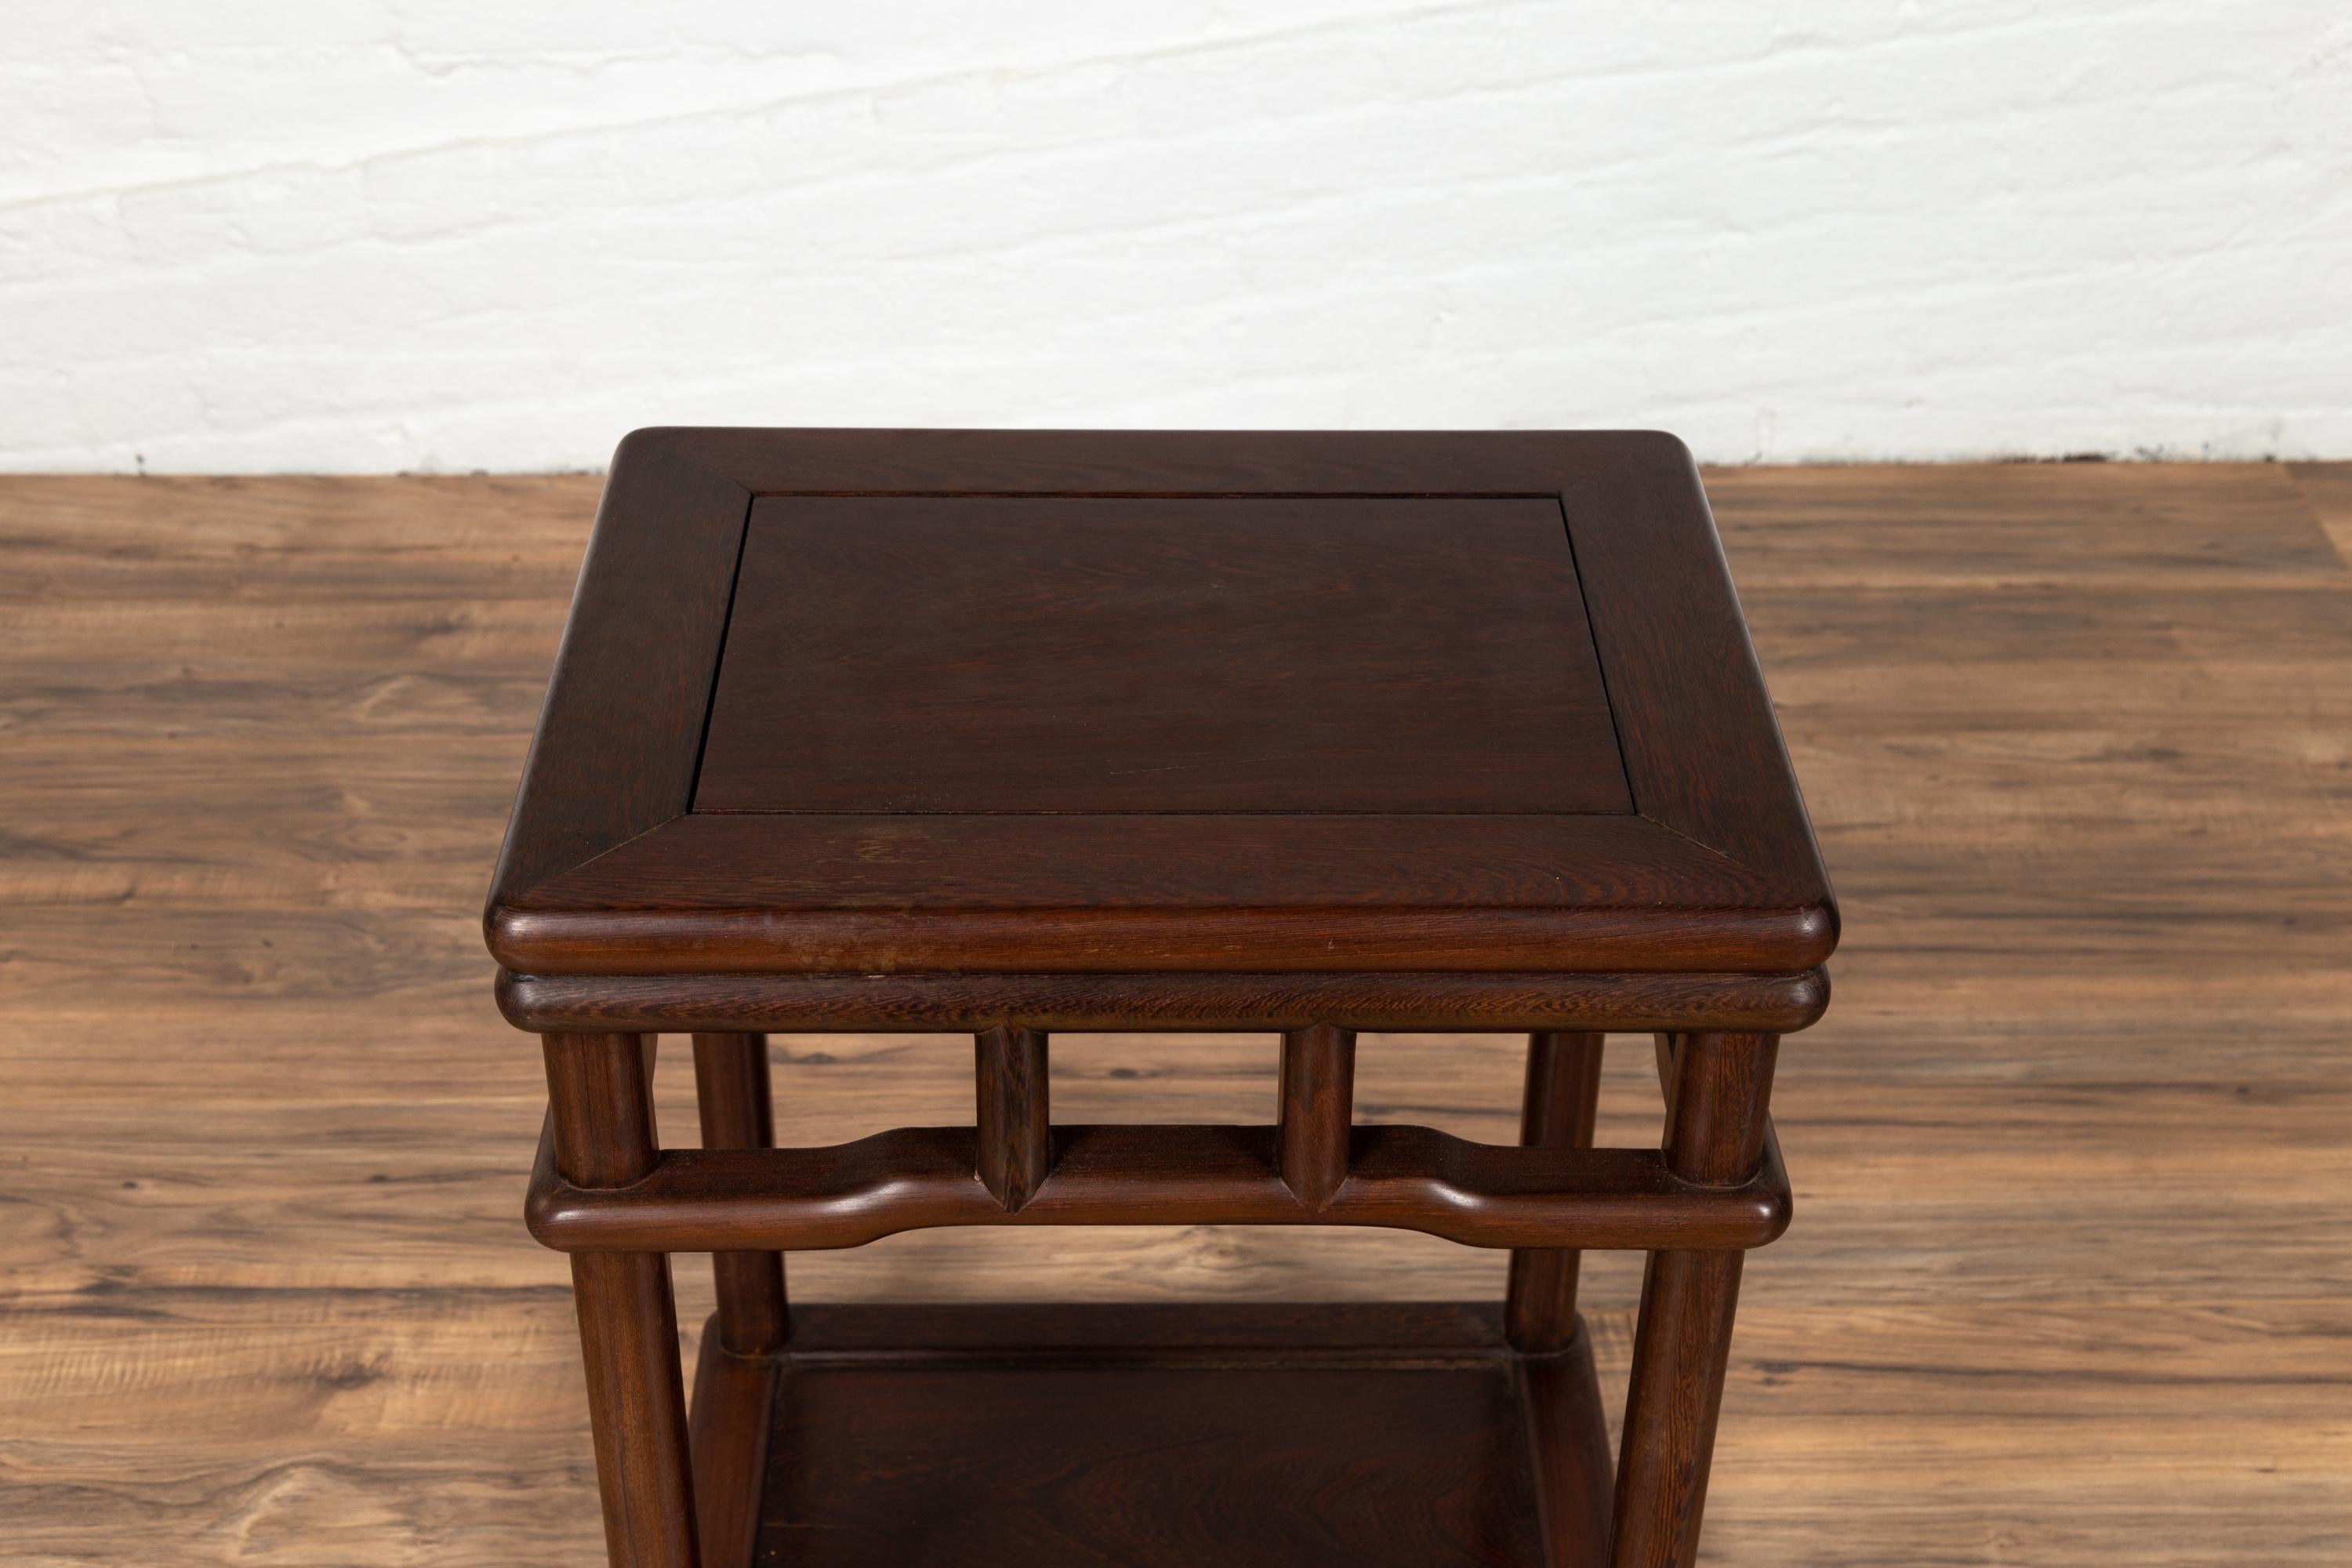 20th Century Chinese Ming Style Accent Side Table with Dark Wood Patina and Humpback Apron